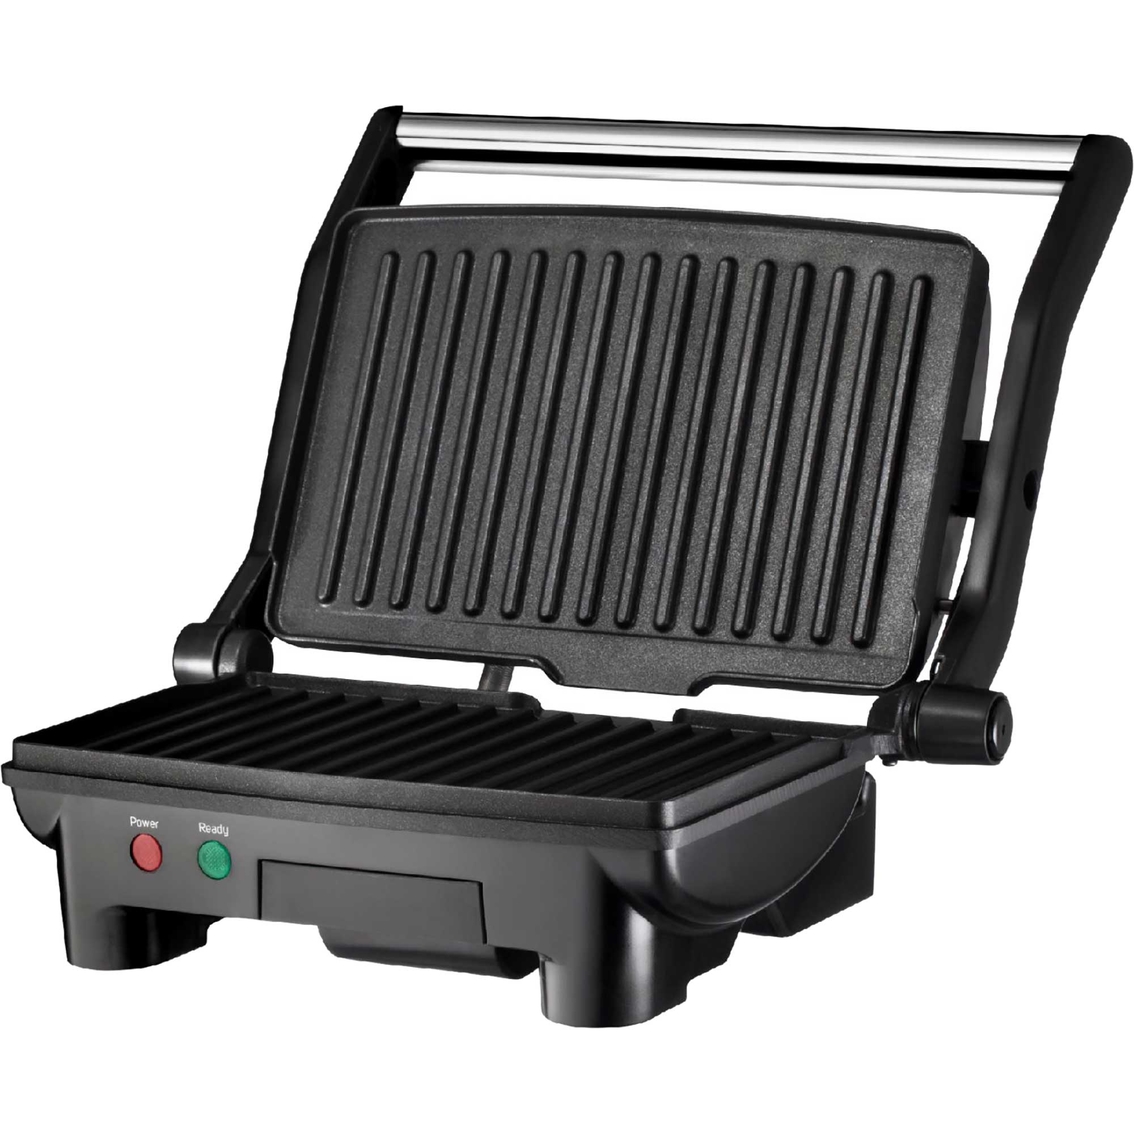 Chefman Panini Press Grill and Gourmet Sandwich Maker - Image 2 of 9